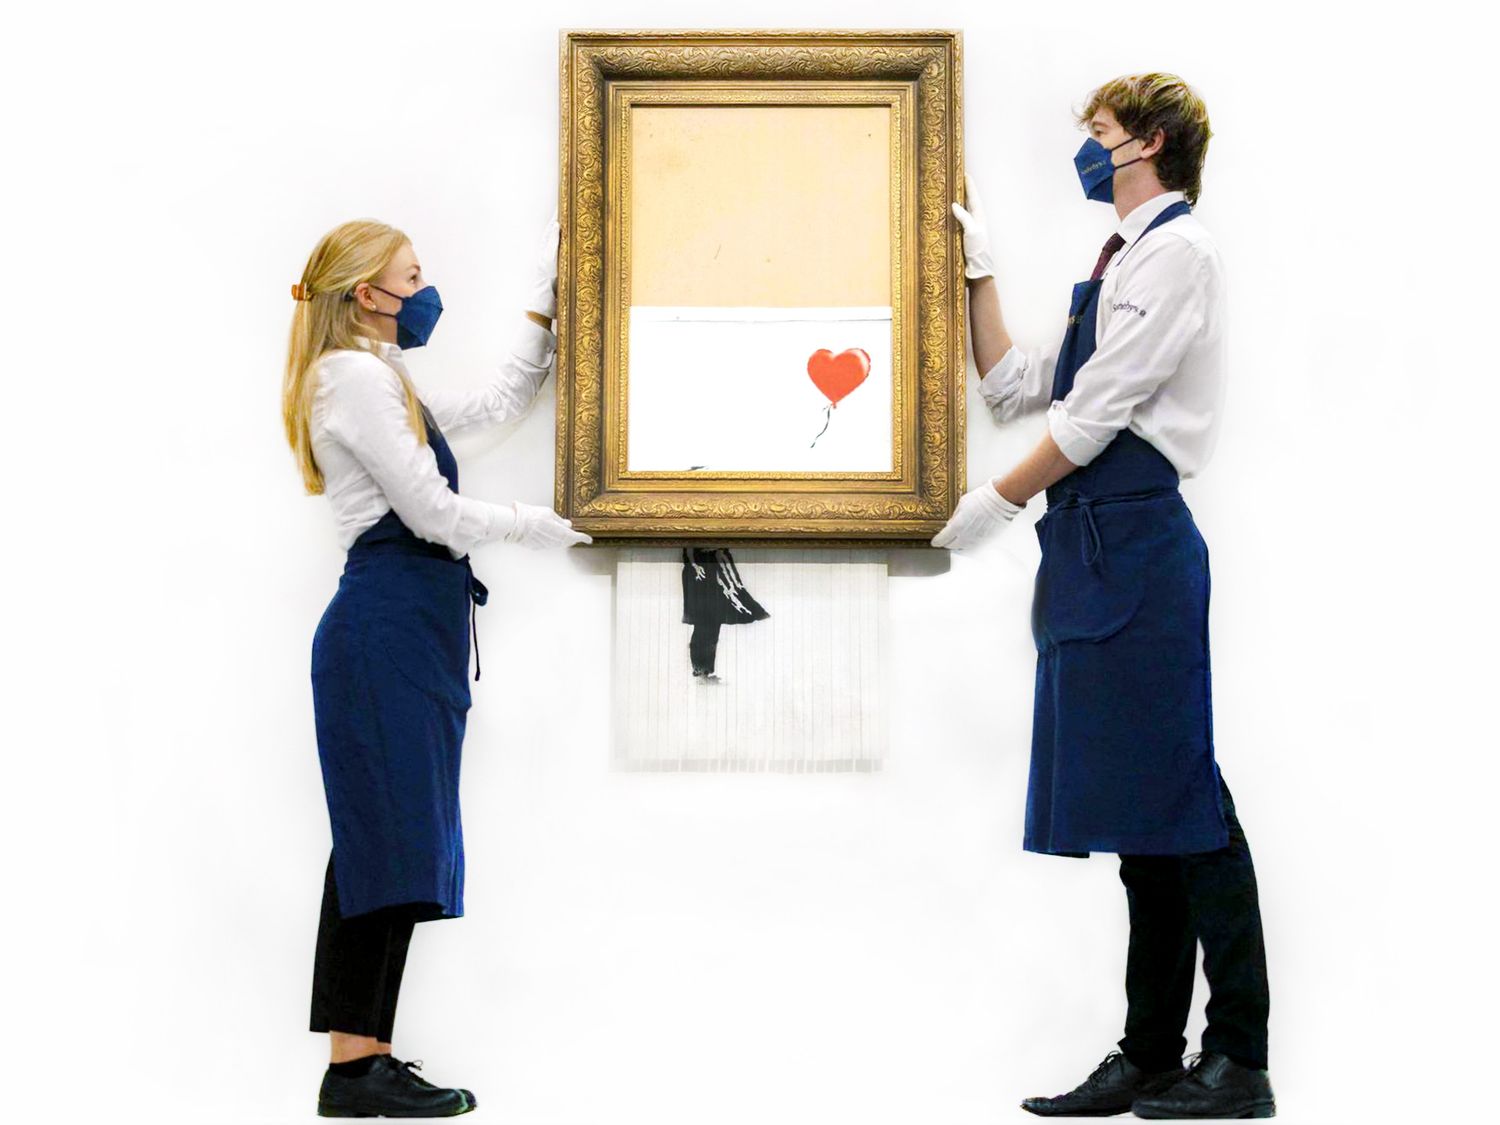 The famous "Love Is In The Bin" by Banksy which was sold for 1.2 million euros in 2018 and which saw its value increased by 18 during the last sale on 14 October 2021 (©Sotheby's).